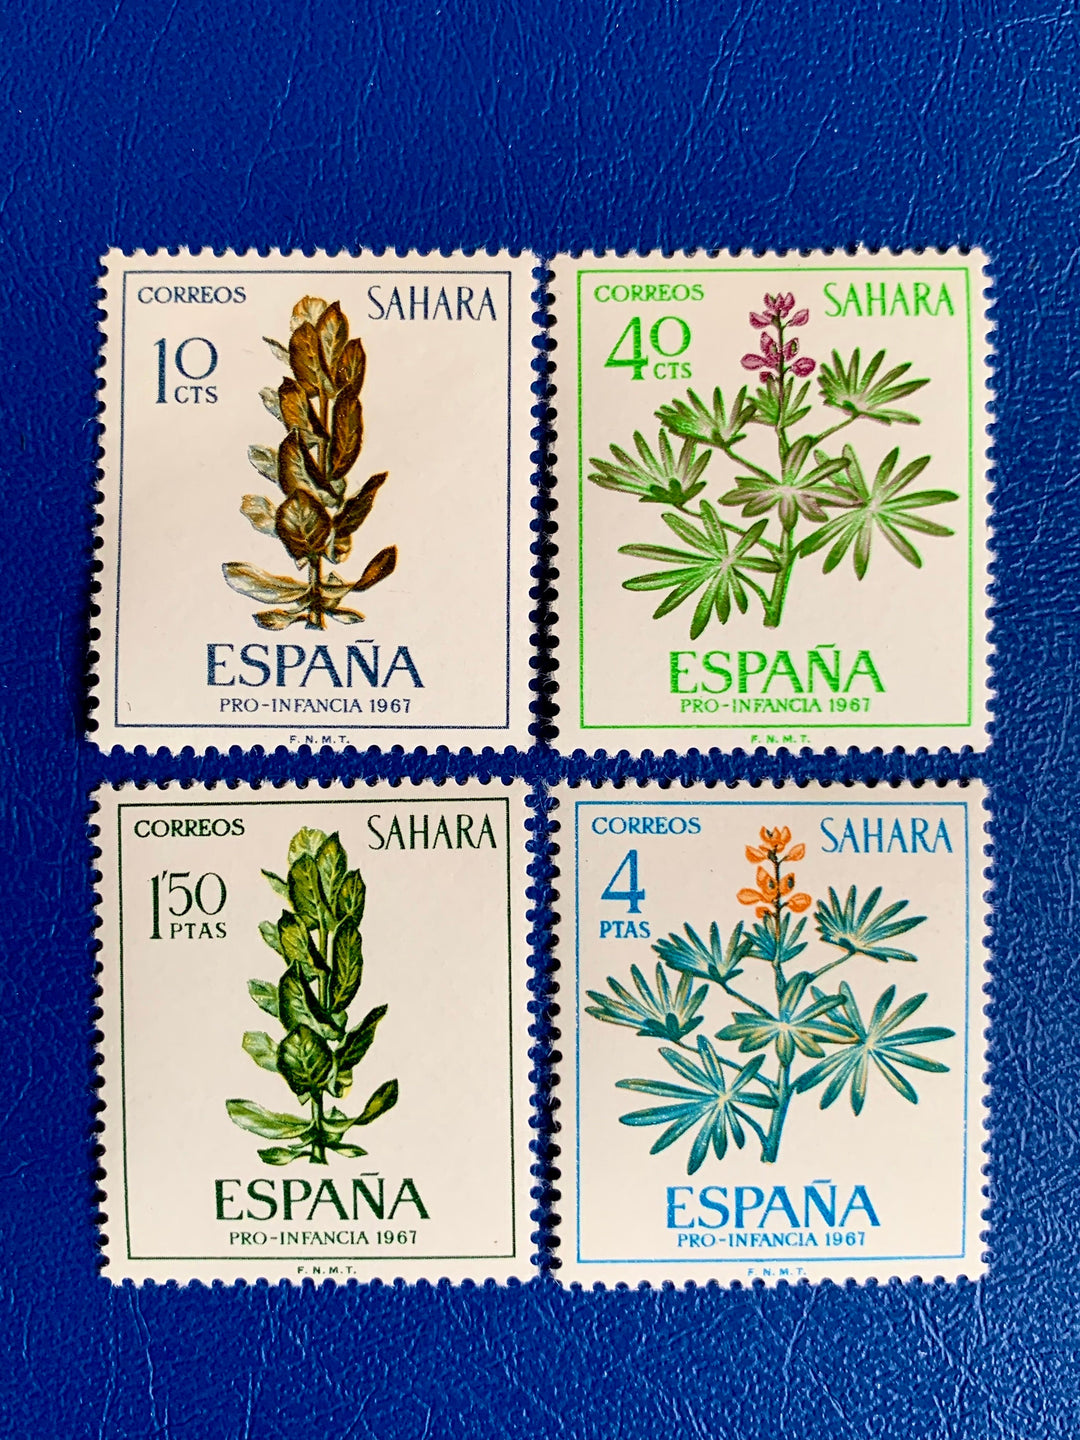 Sp. Sahara - Original Vintage Postage Stamps - 1967 - Plants (Lupin & Ficus) - for the collector, artist or crafter